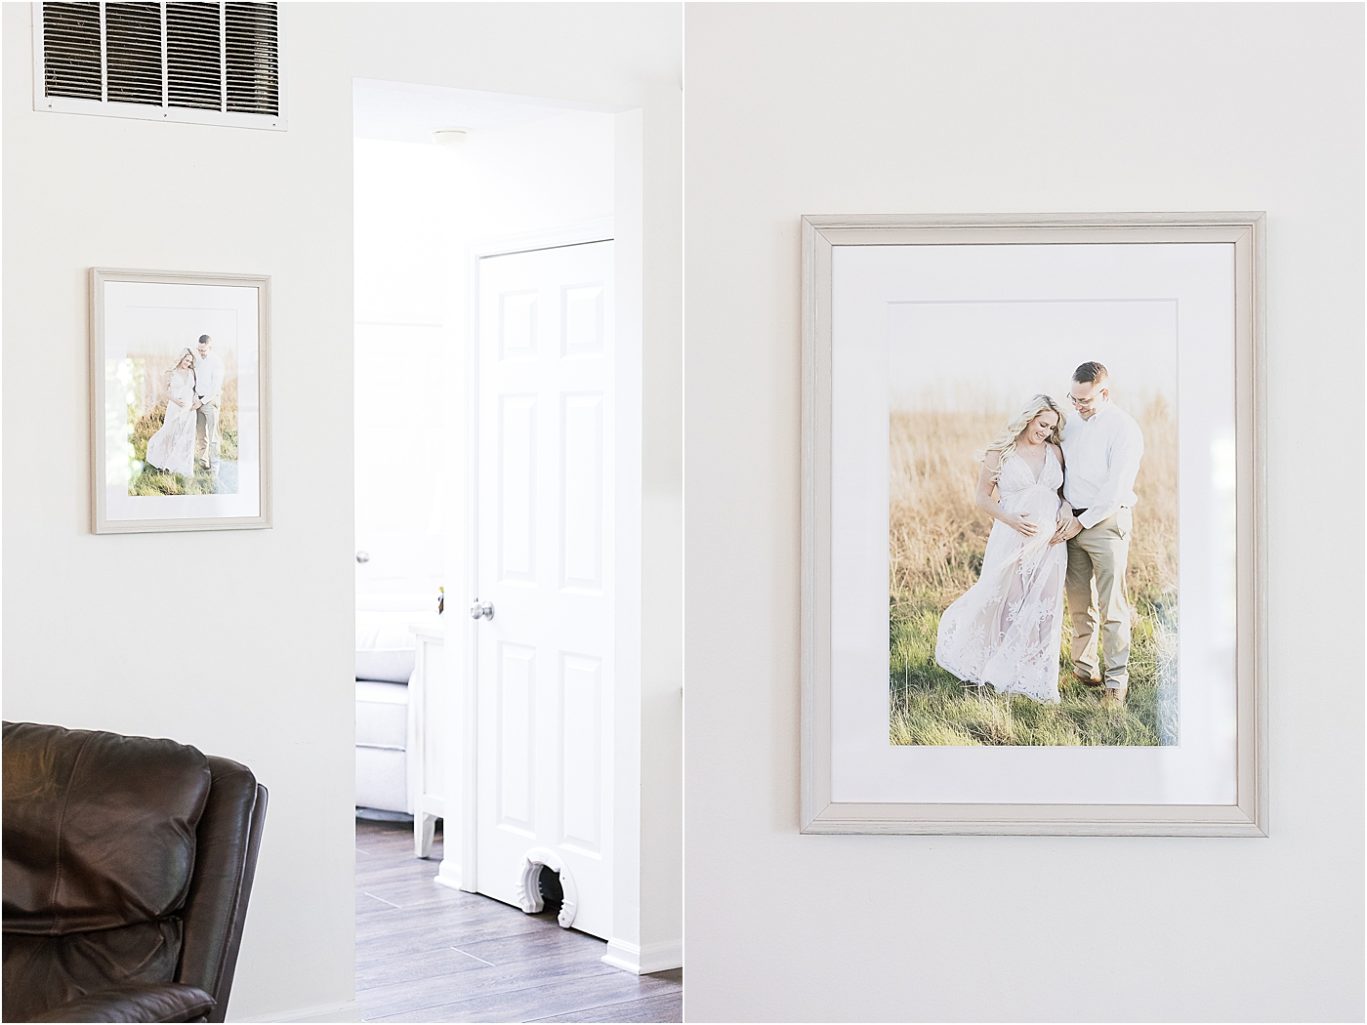 Custom framing and installation in Fishers, IN | Lindsay Konopa Photography